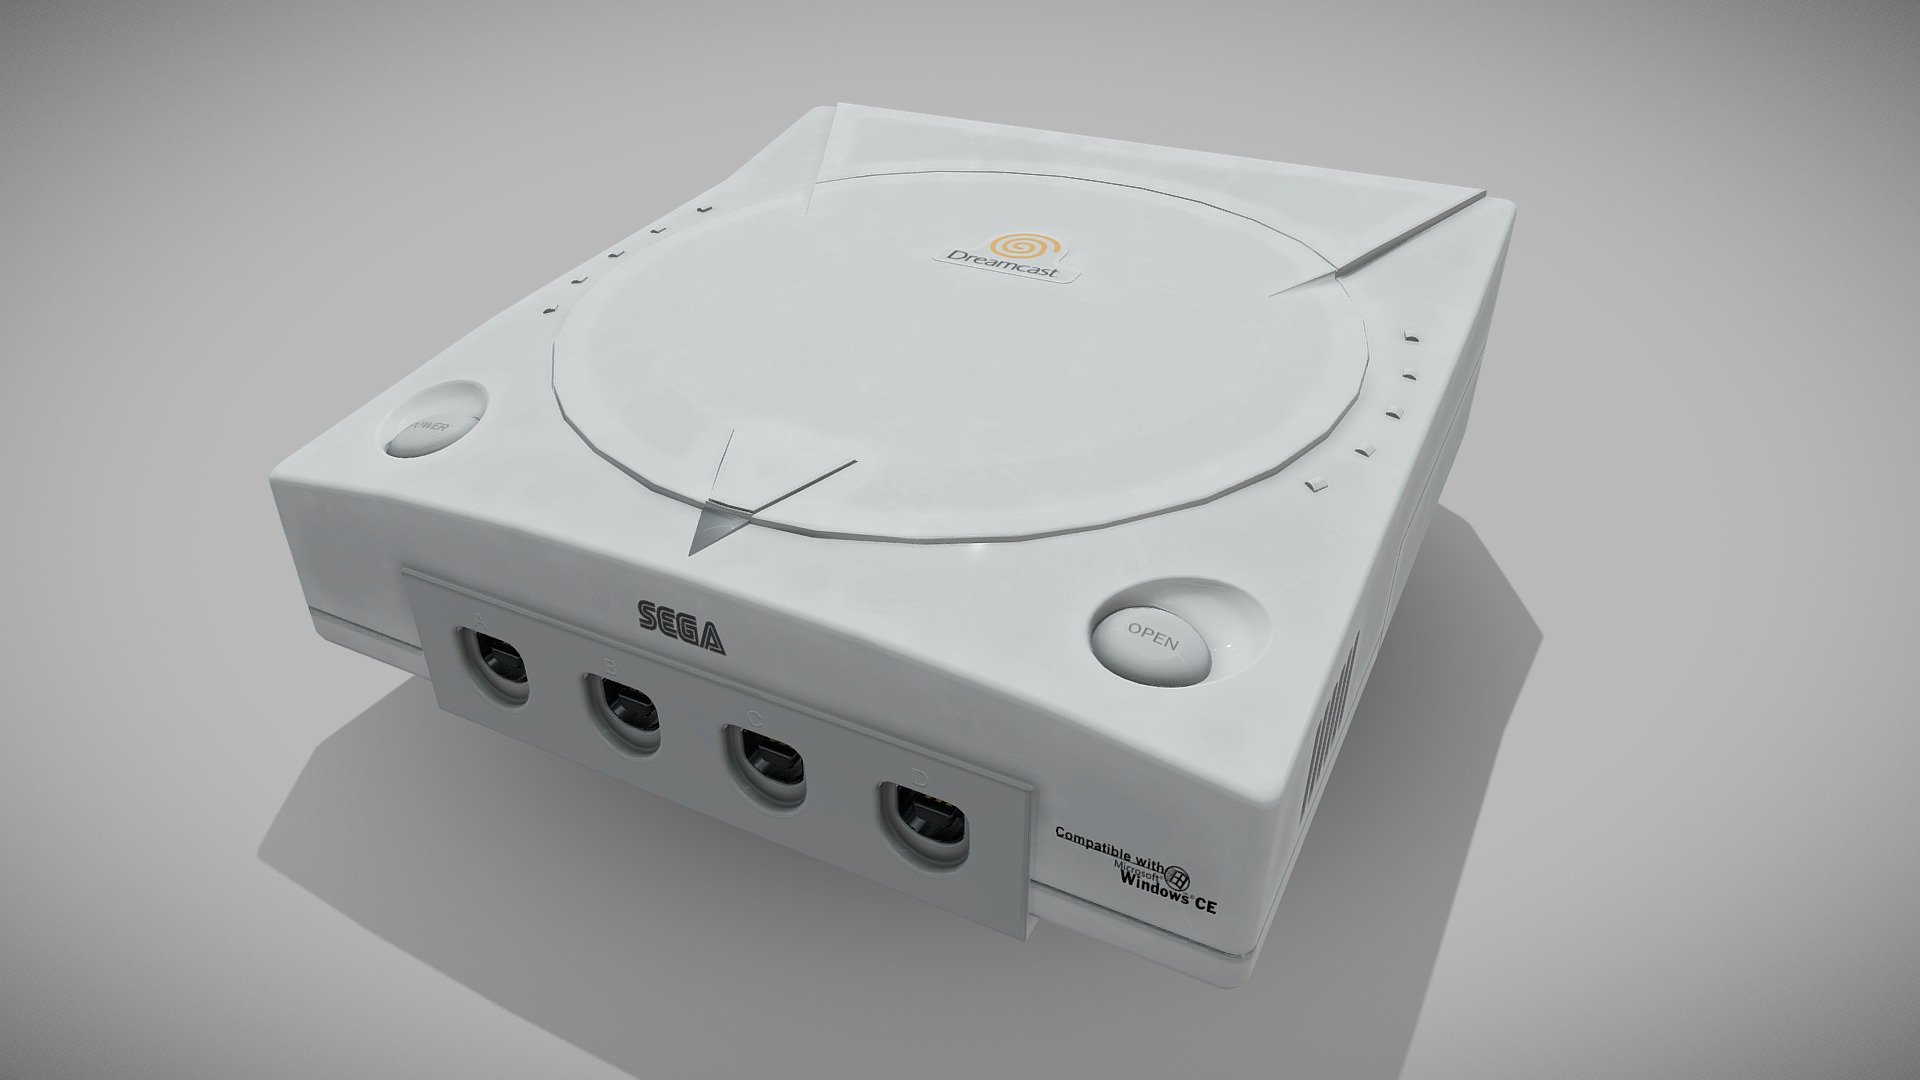 Sega Dreamcast is a home video game console released by Sega. It was the first in the sixth generation of video game consoles, preceding Sony's PlayStation 2, Nintendo's GameCube, and Microsoft's Xbox. The Dreamcast was Sega's final home console, marking the end of the company's eighteen years in the console market.

Used tools: Blender / Substance Painter

Used Music: &ldquo;SA2 &hellip;Main Riff for &lsquo;'Sonic Adventure 2